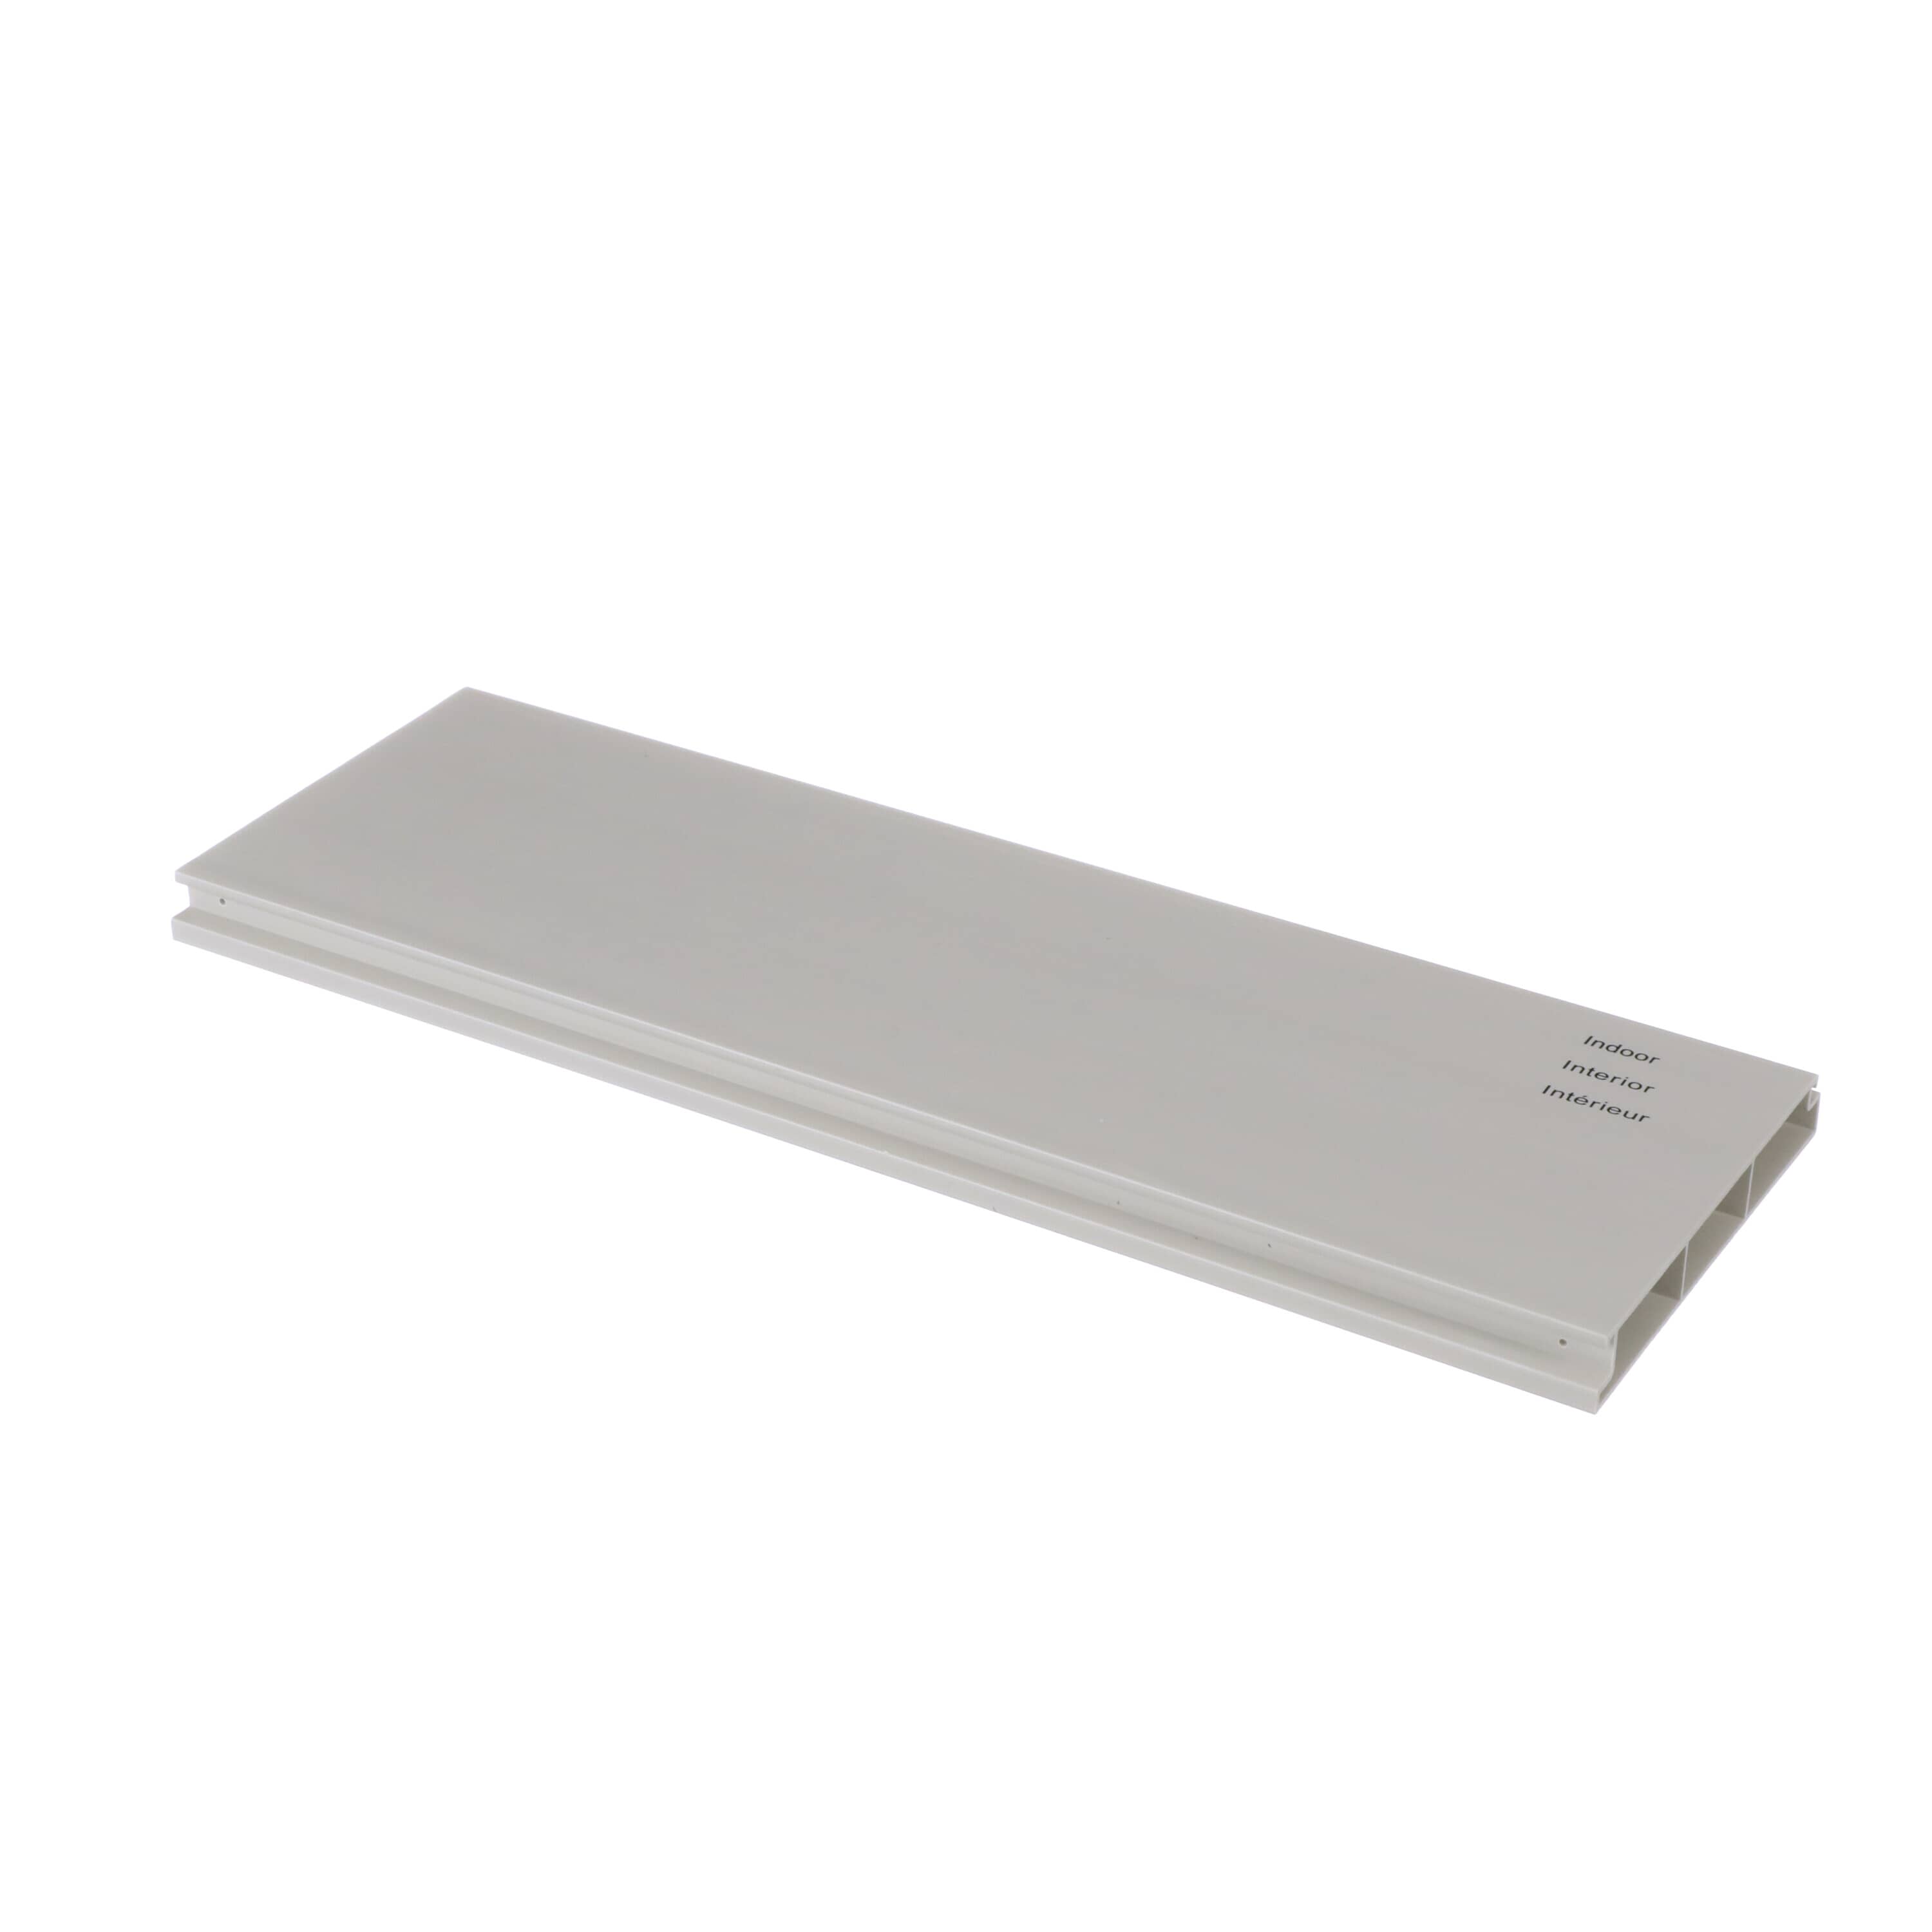 LG COV33315701 Air Conditioner Window Panel Outsourcing